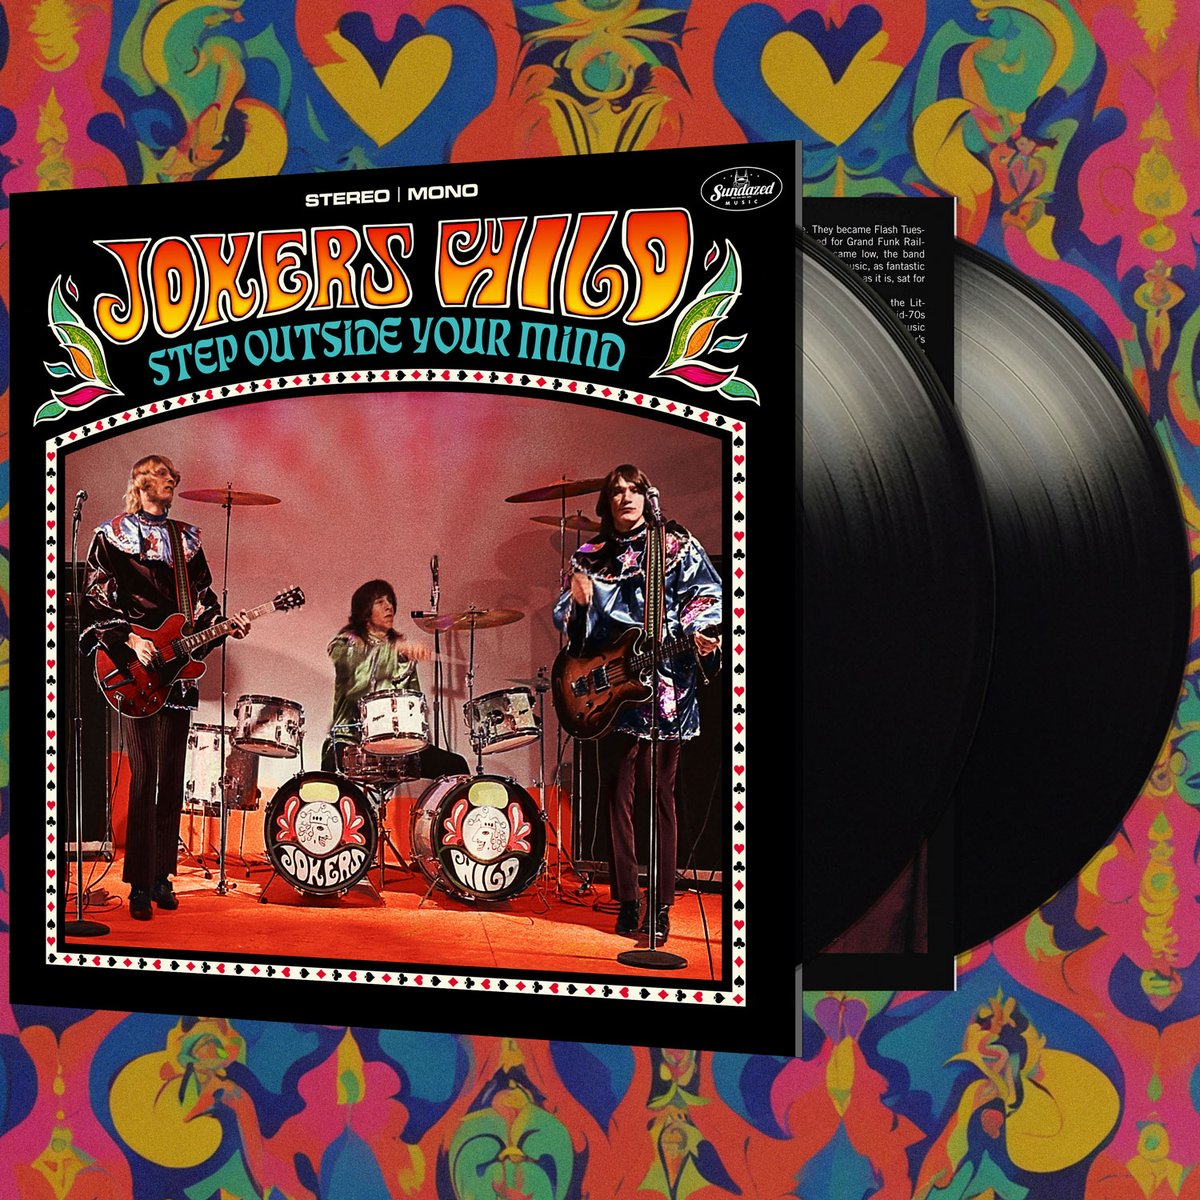 Now available! A double LP’s worth of Minneapolis psych madmen Jokers Wild! Includes all of their rare singles, plus 15 more originally unreleased mind-melting cuts - complete with slide whistle! Includes new liner notes & is also on 2CD! Order here: sundazed.com/jokers-wild.as…